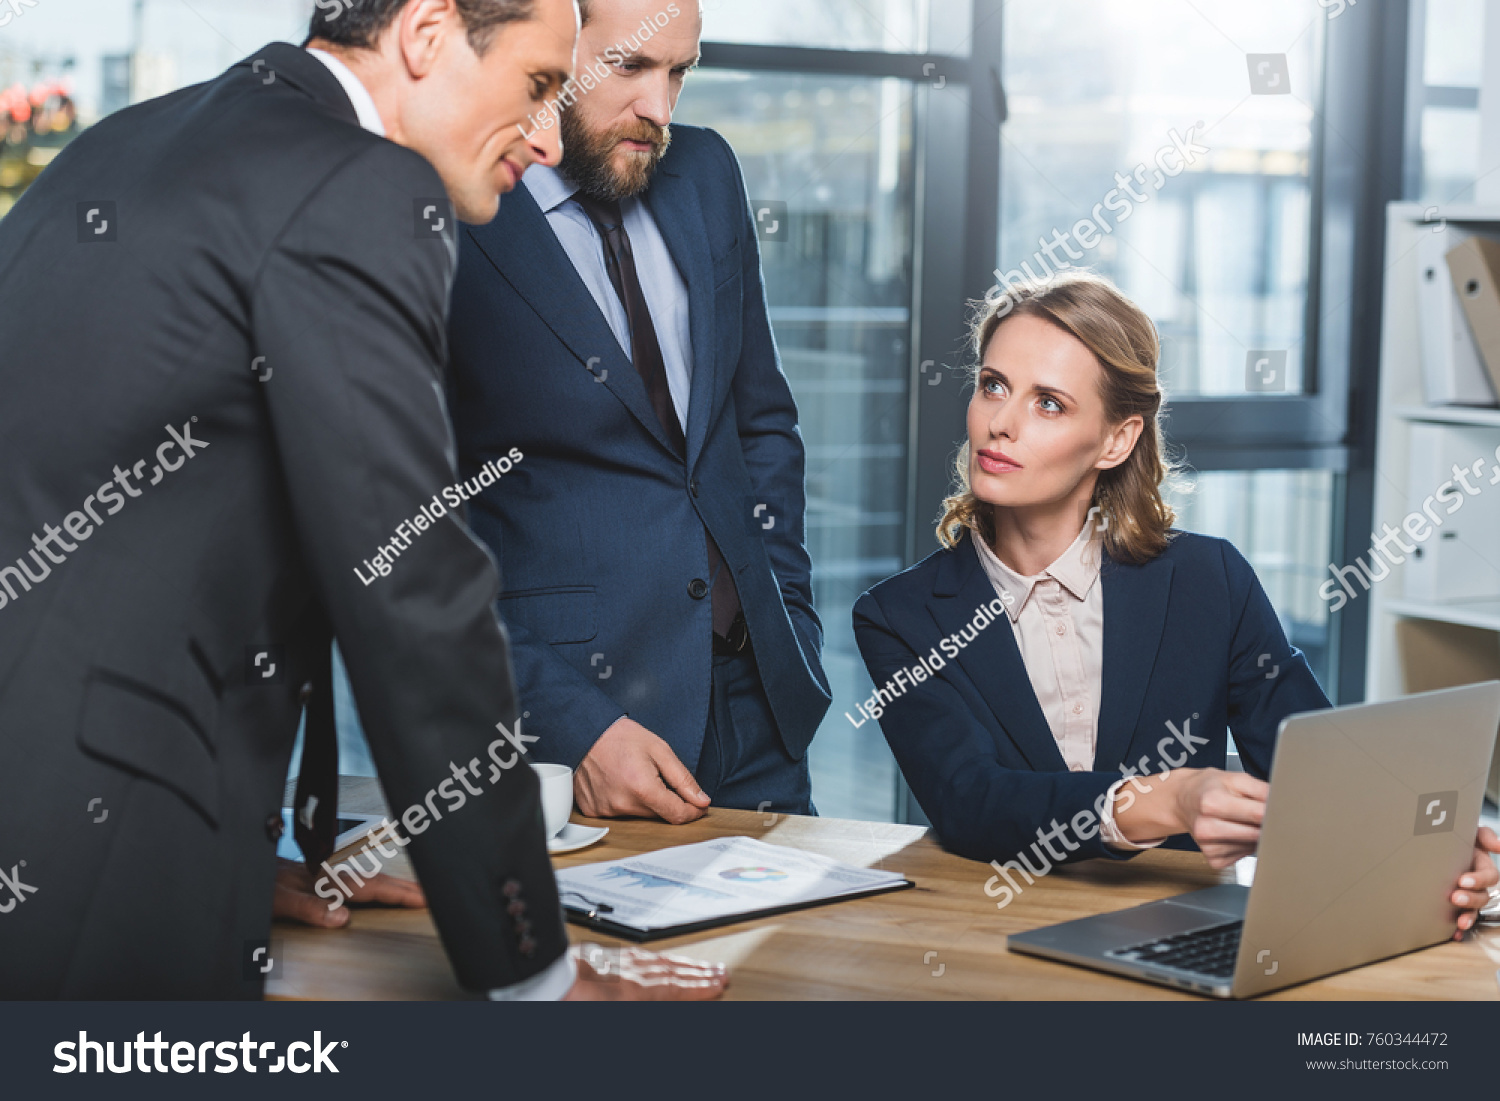 portrait of concentrated lawyers using laptop together during work in office #760344472